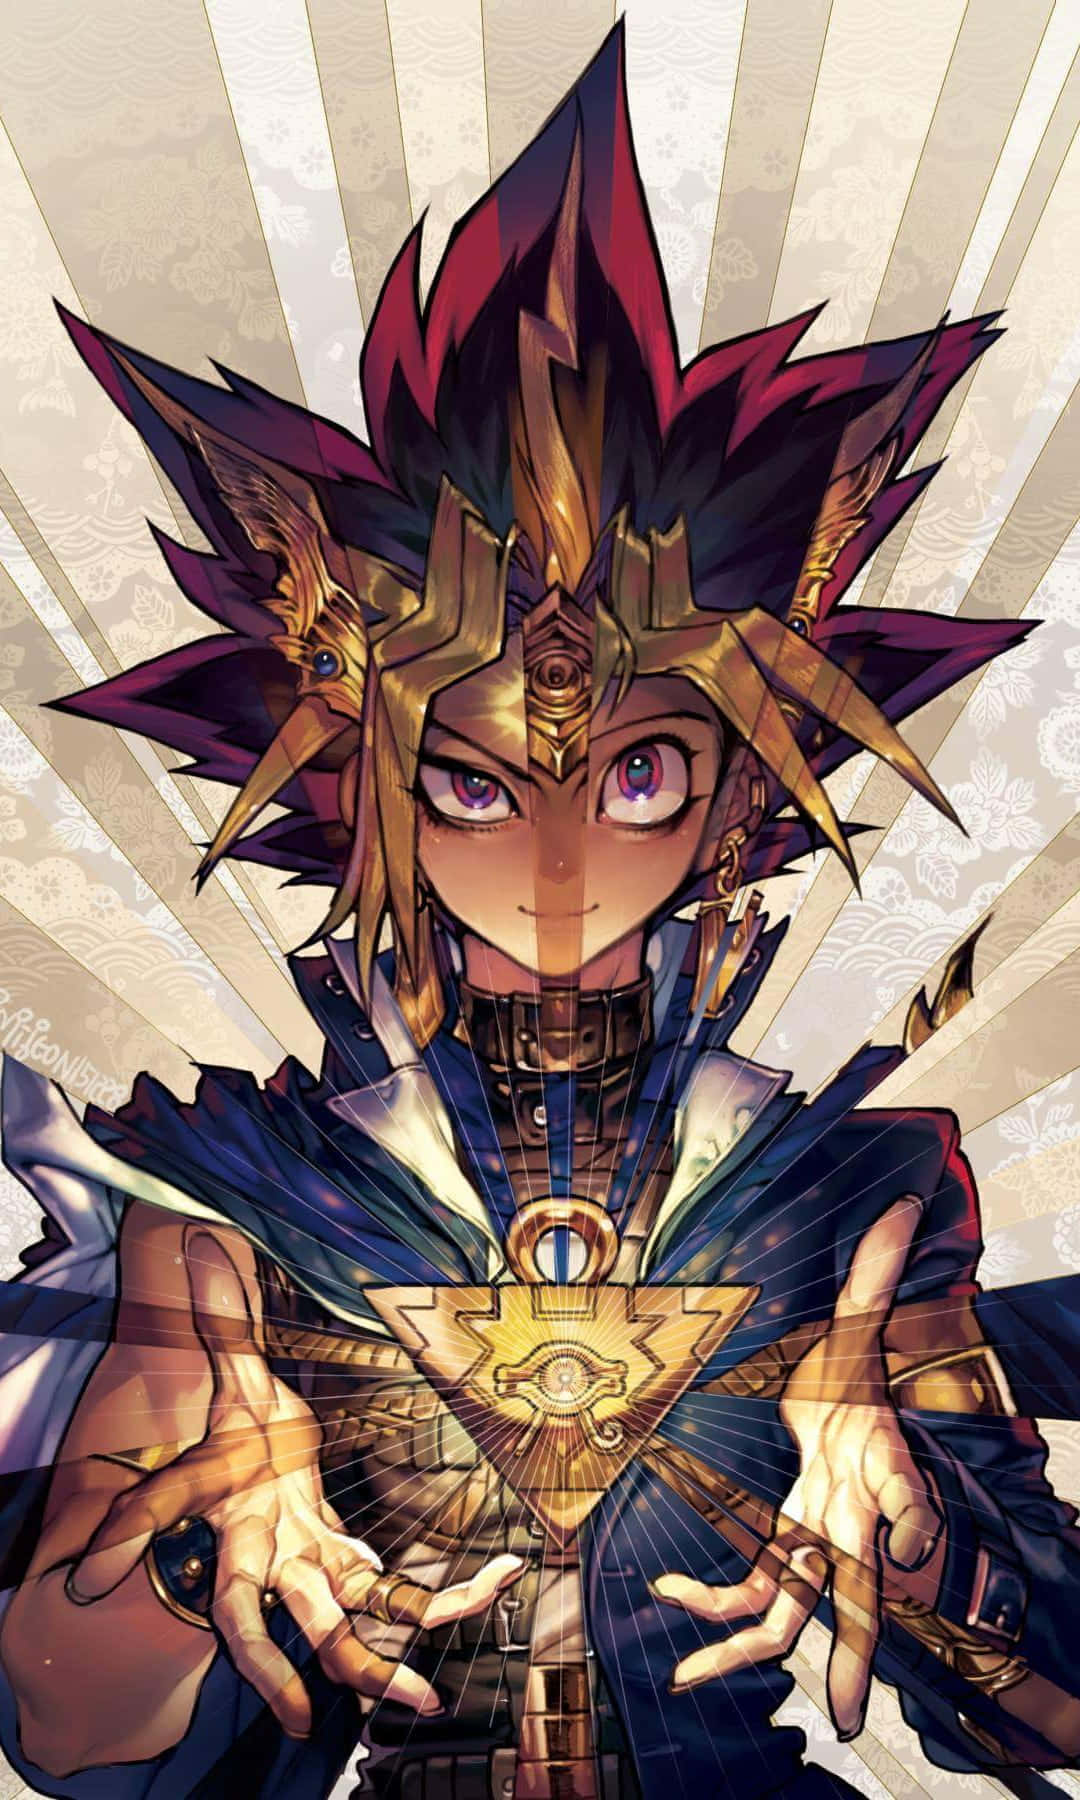 Yugi Muto in action - Unleashing the power of his deck! Wallpaper